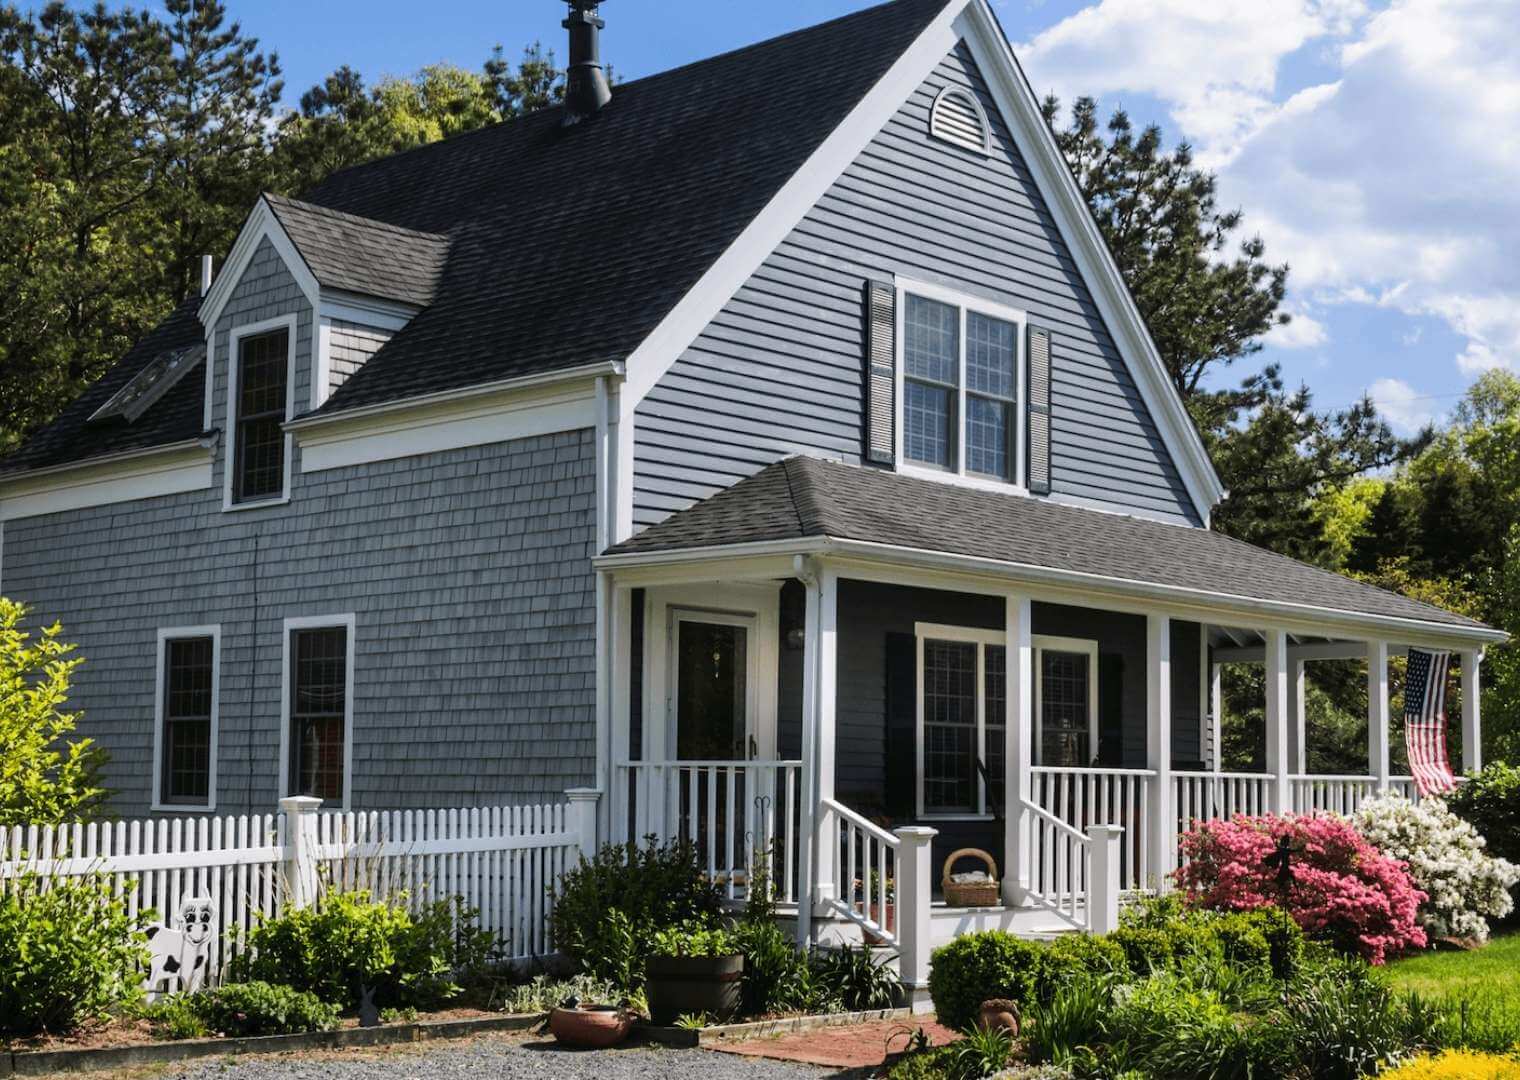 There are also new, architect-designed Cape homes across the Valley. They typically include key features of the Cape Cod style with modern exterior touches and luxurious interiors.